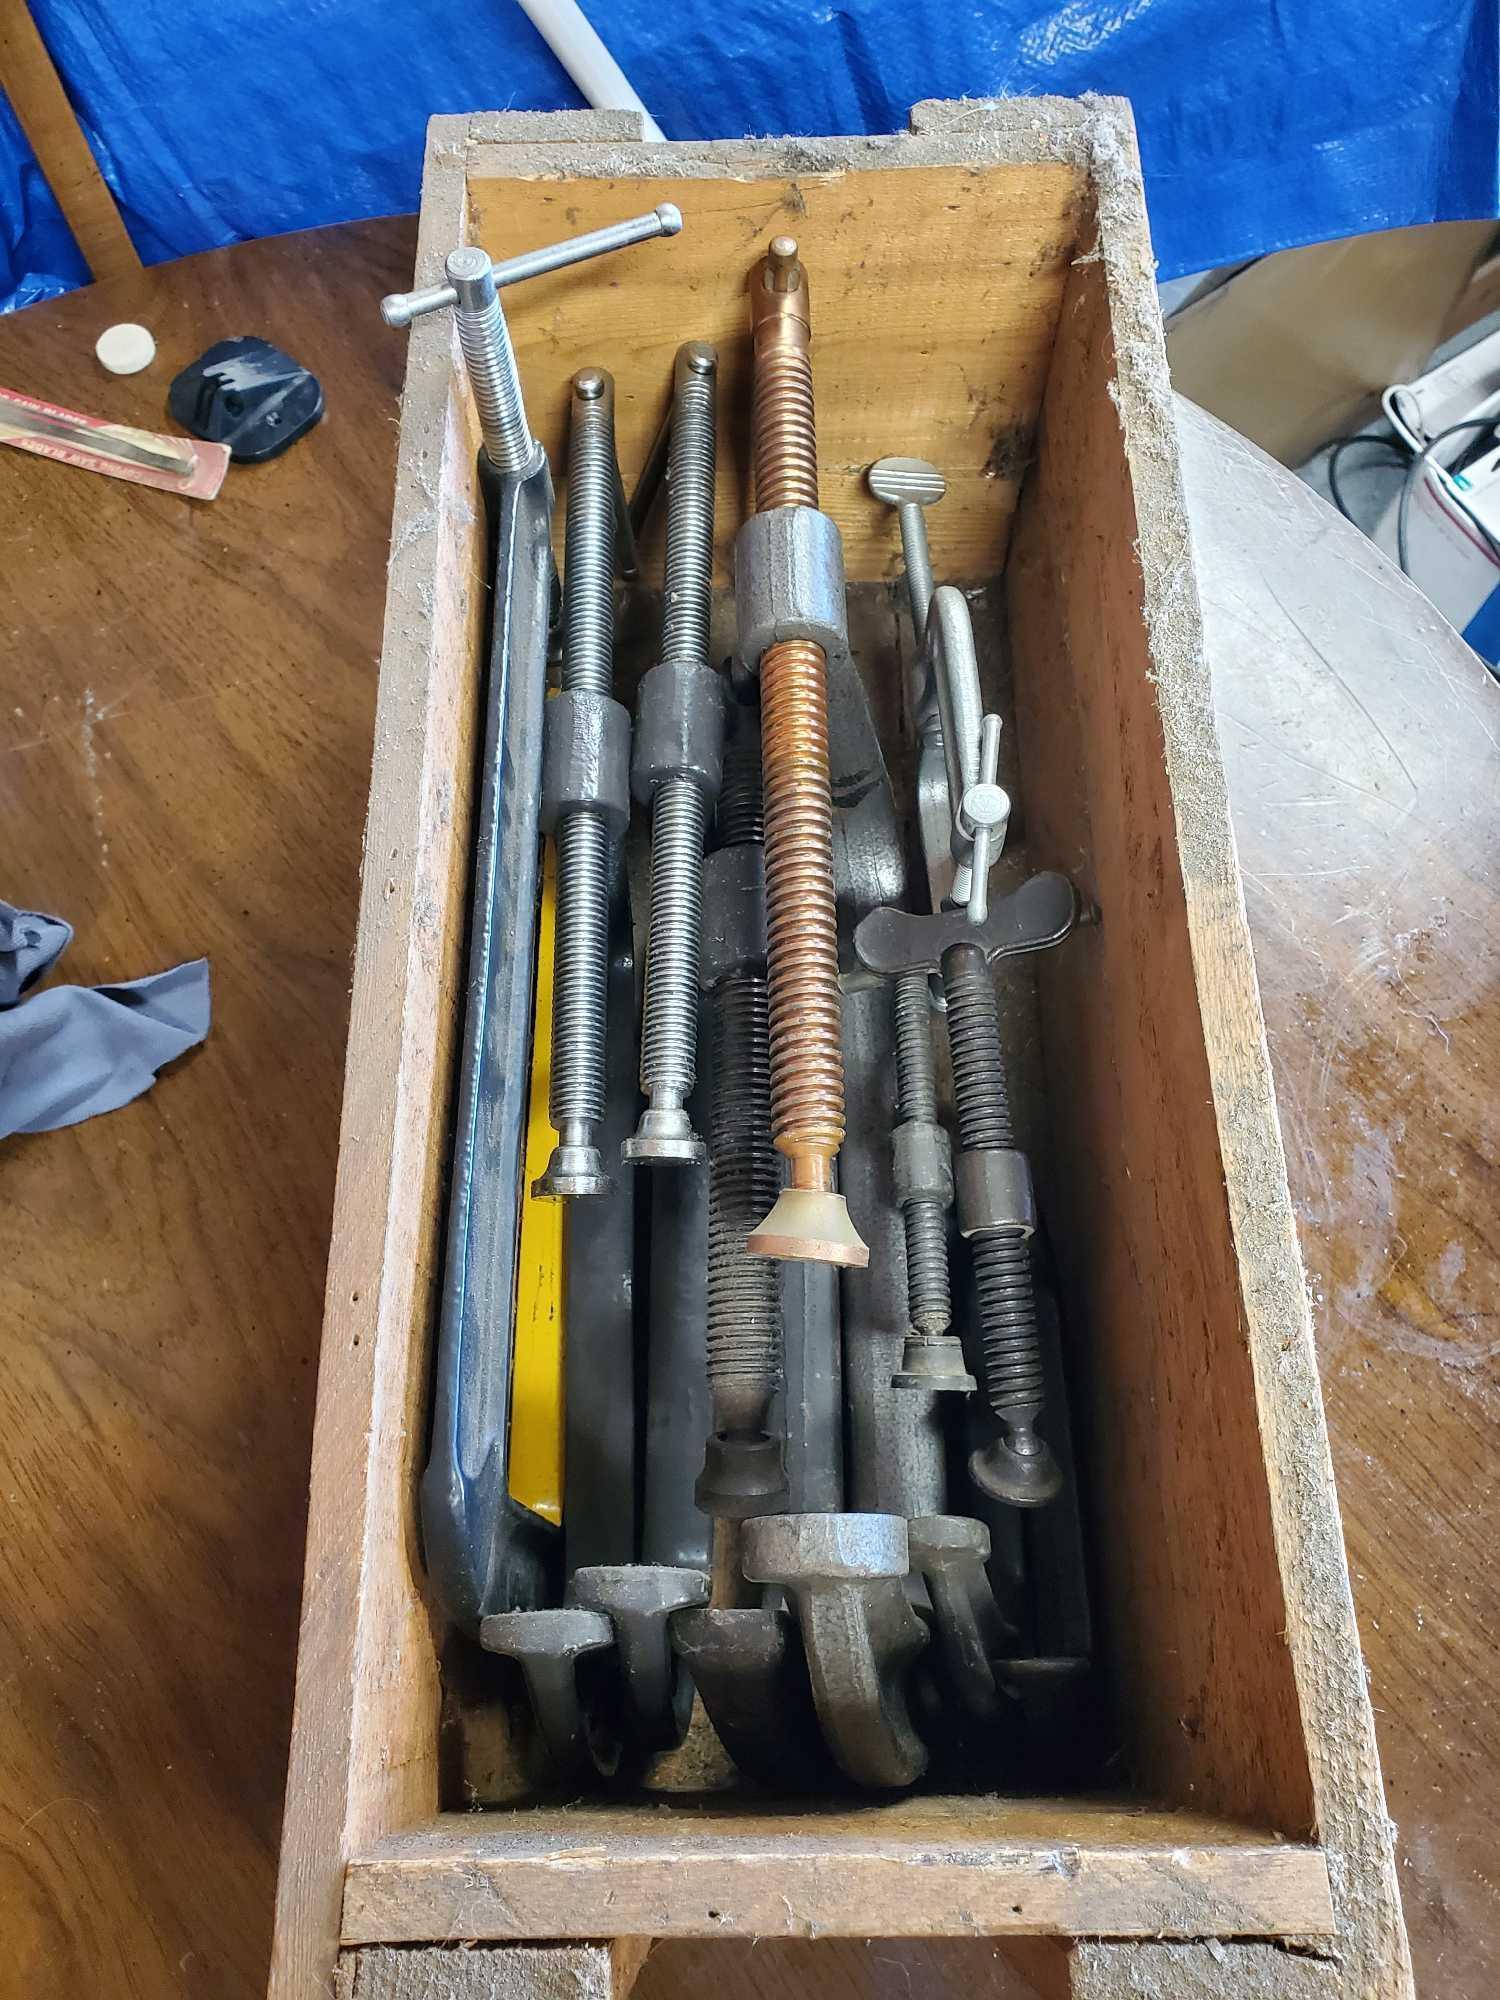 10 LARGE C CLAMPS AND WOOD BOX